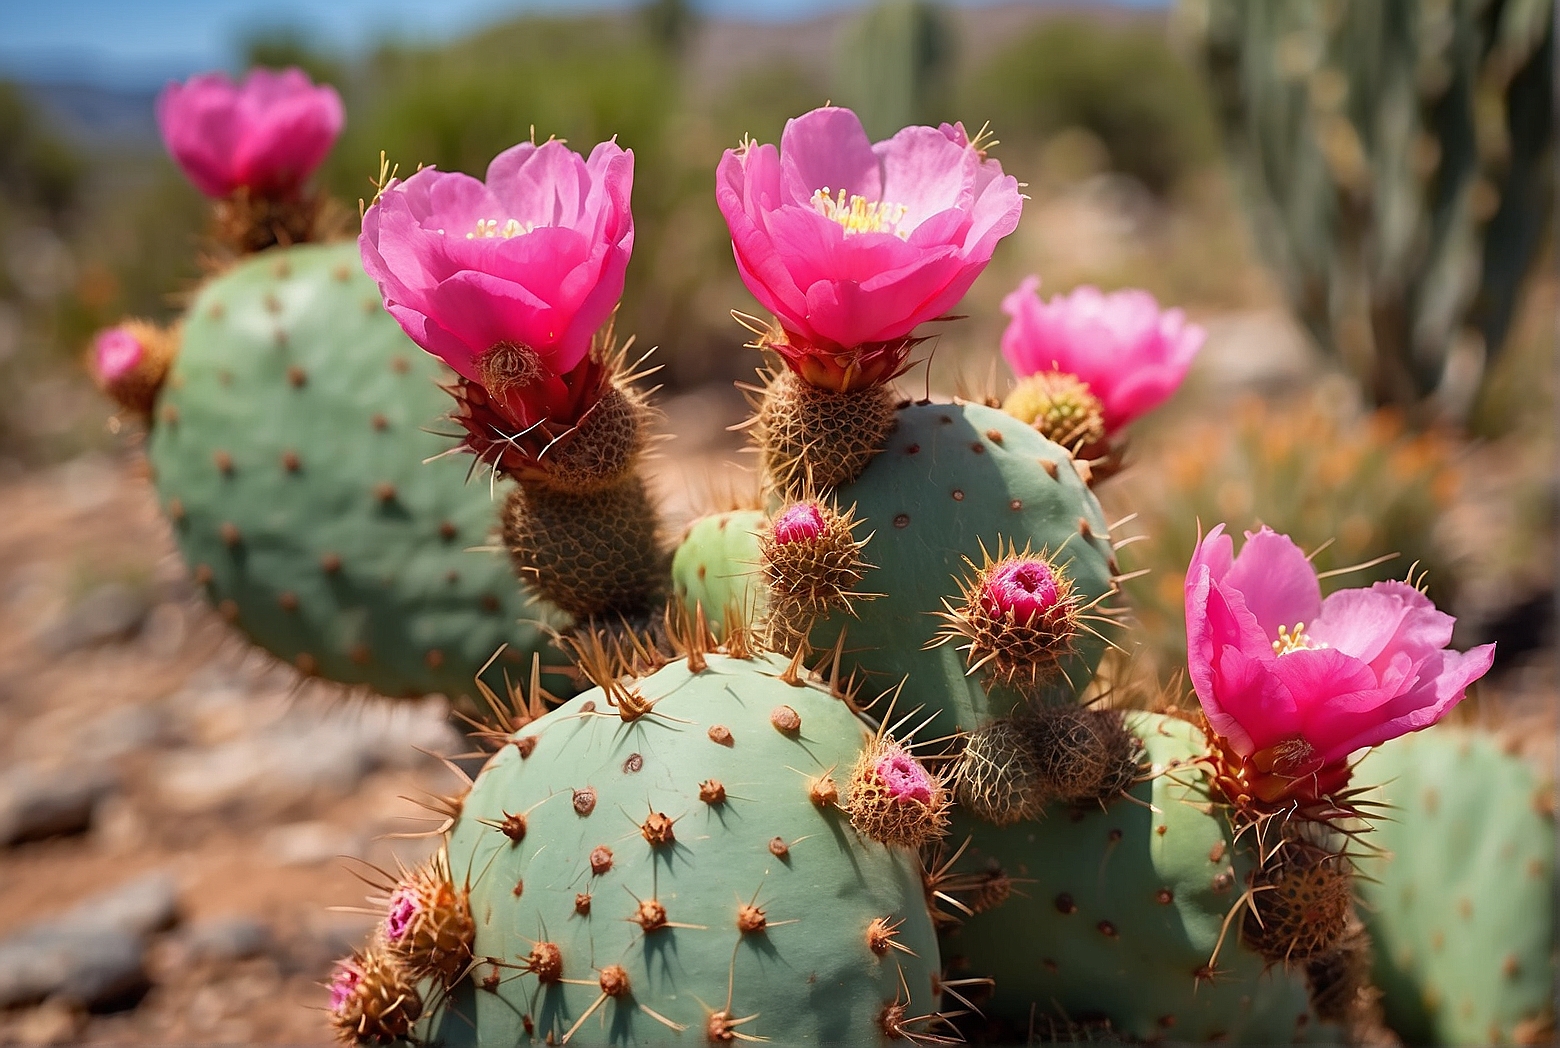 Prickly Pear Cactus Care: A Guide to Proper Maintenance